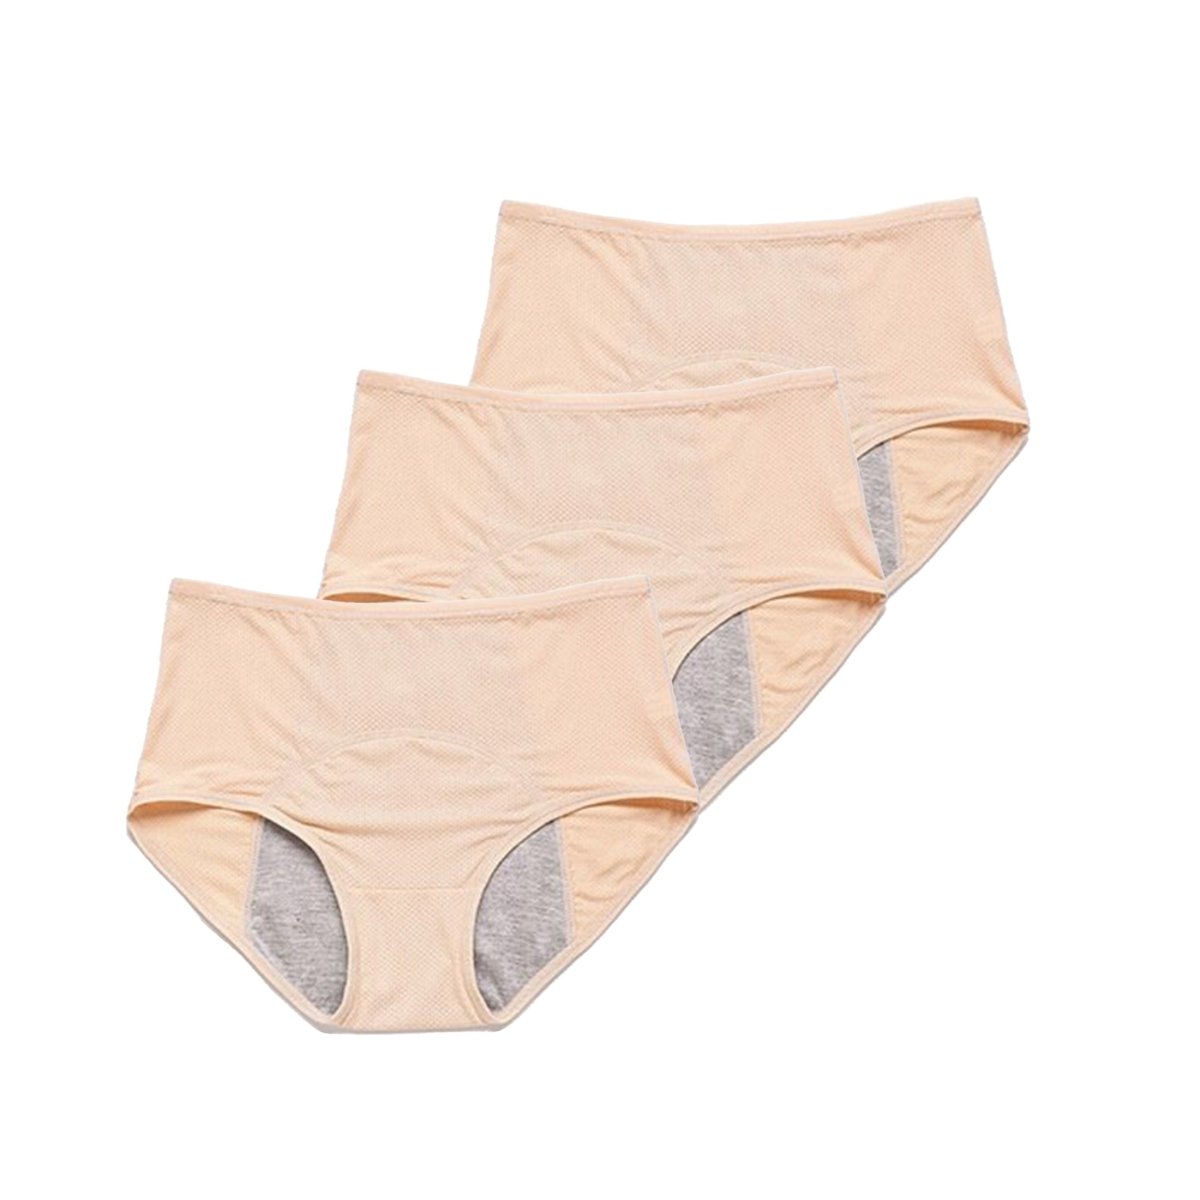 Buy Adira, Leakproof Period Panties, Made With Hi-Tech Soft Cotton Crotch, Dry & Hygienic From Everyday Discharge, Leakproof & Breathable, Full  Back Coverage, Pack Of 2